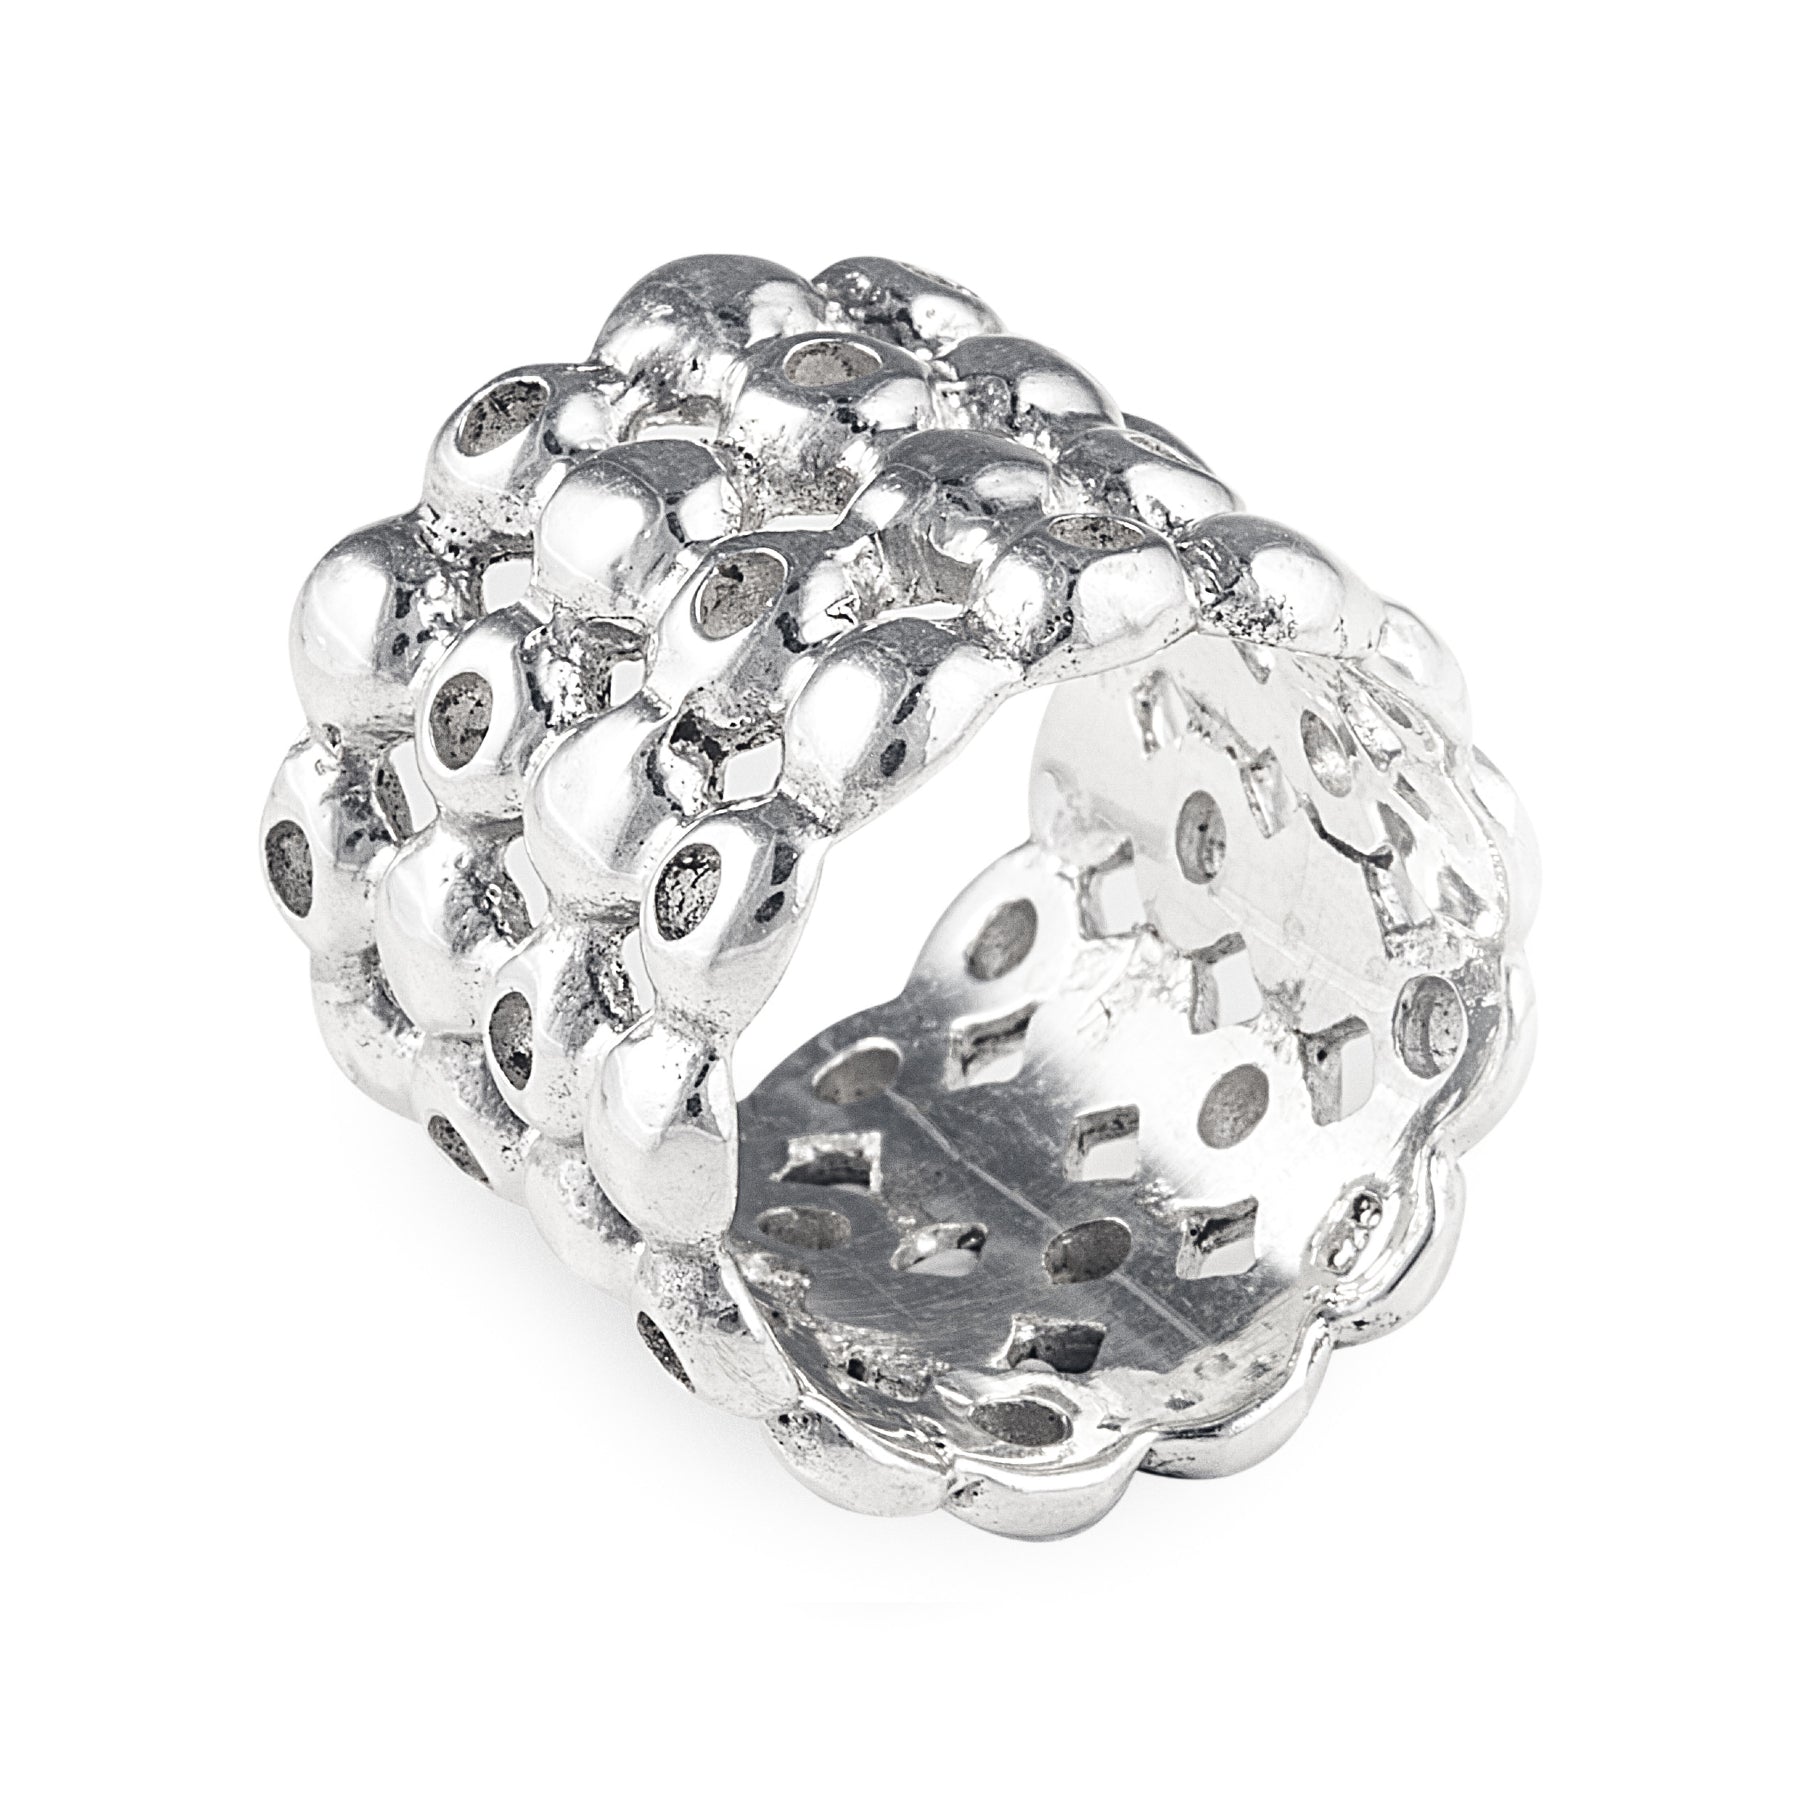 The modern Mexican designed Bubble Ring is made of 925 sterling silver and features bubbles that wrap around your finger. Shop rings & affordable luxury jewellery by Bellagio & Co. Worldwide shipping